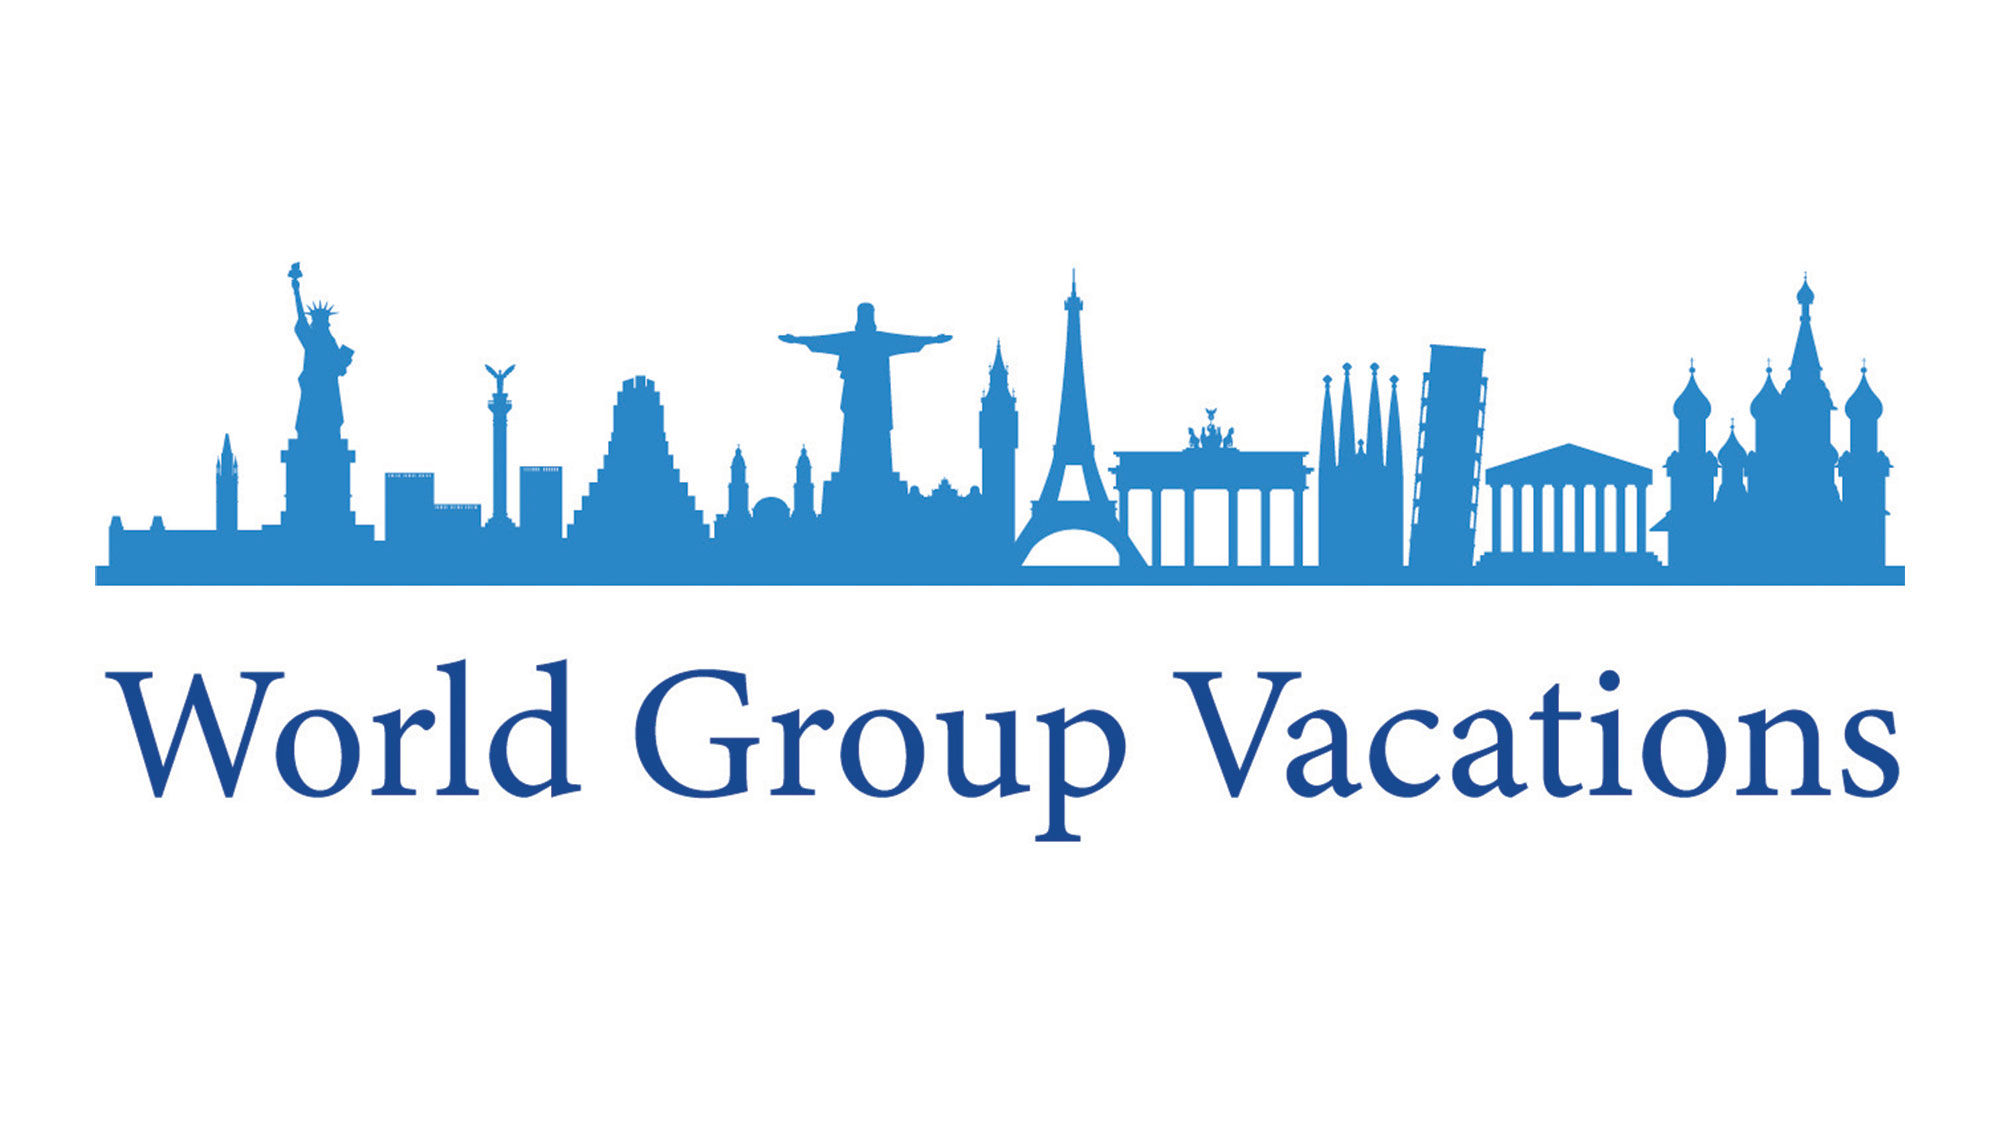 The logo of World Group Vacations, World Travel's new group travel division.